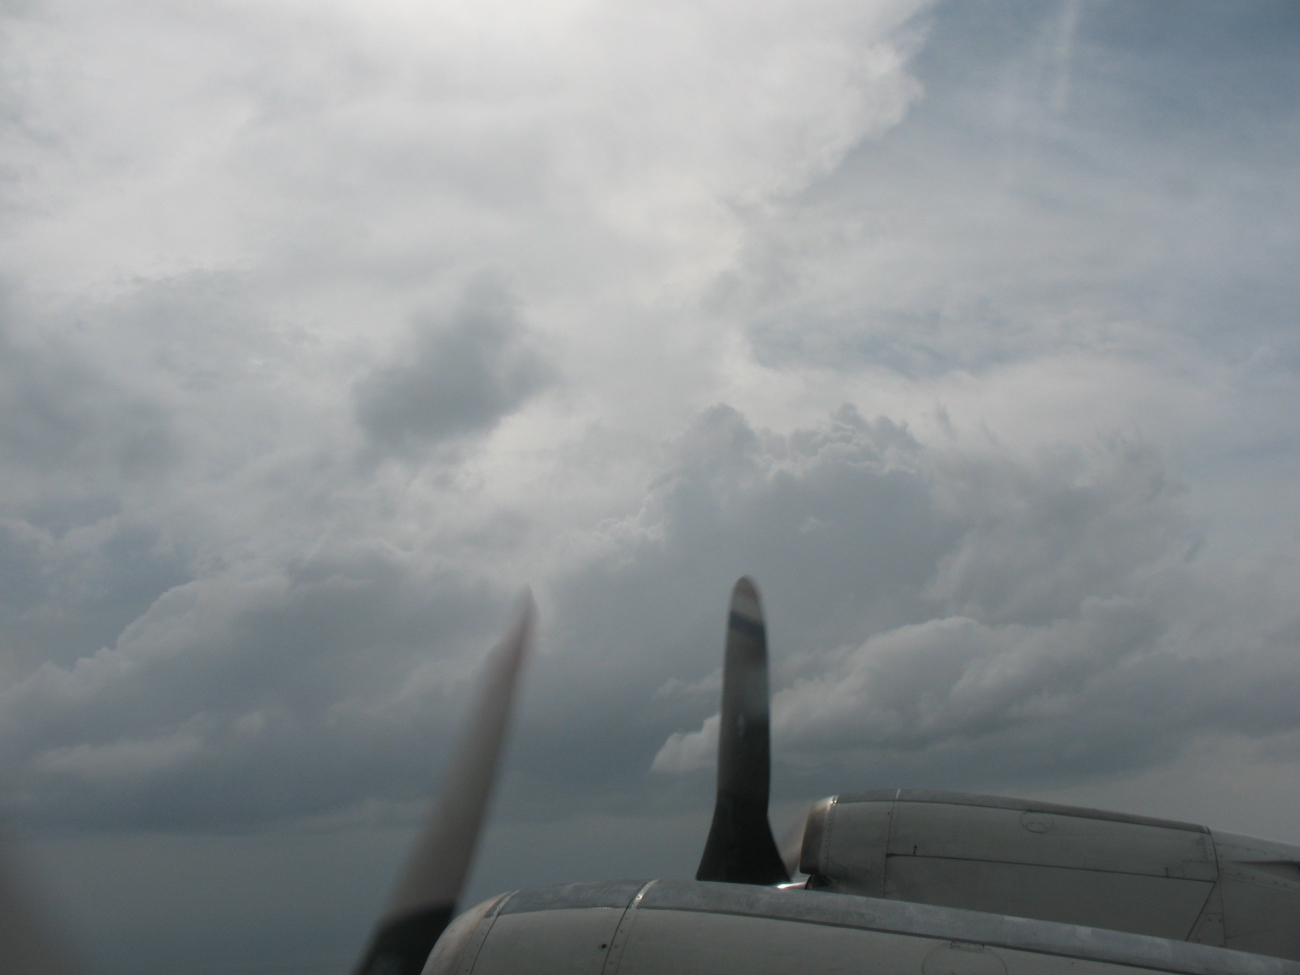 Clouds on the outskirts of Hurricane Ike, seen while leaving MacDill AFB